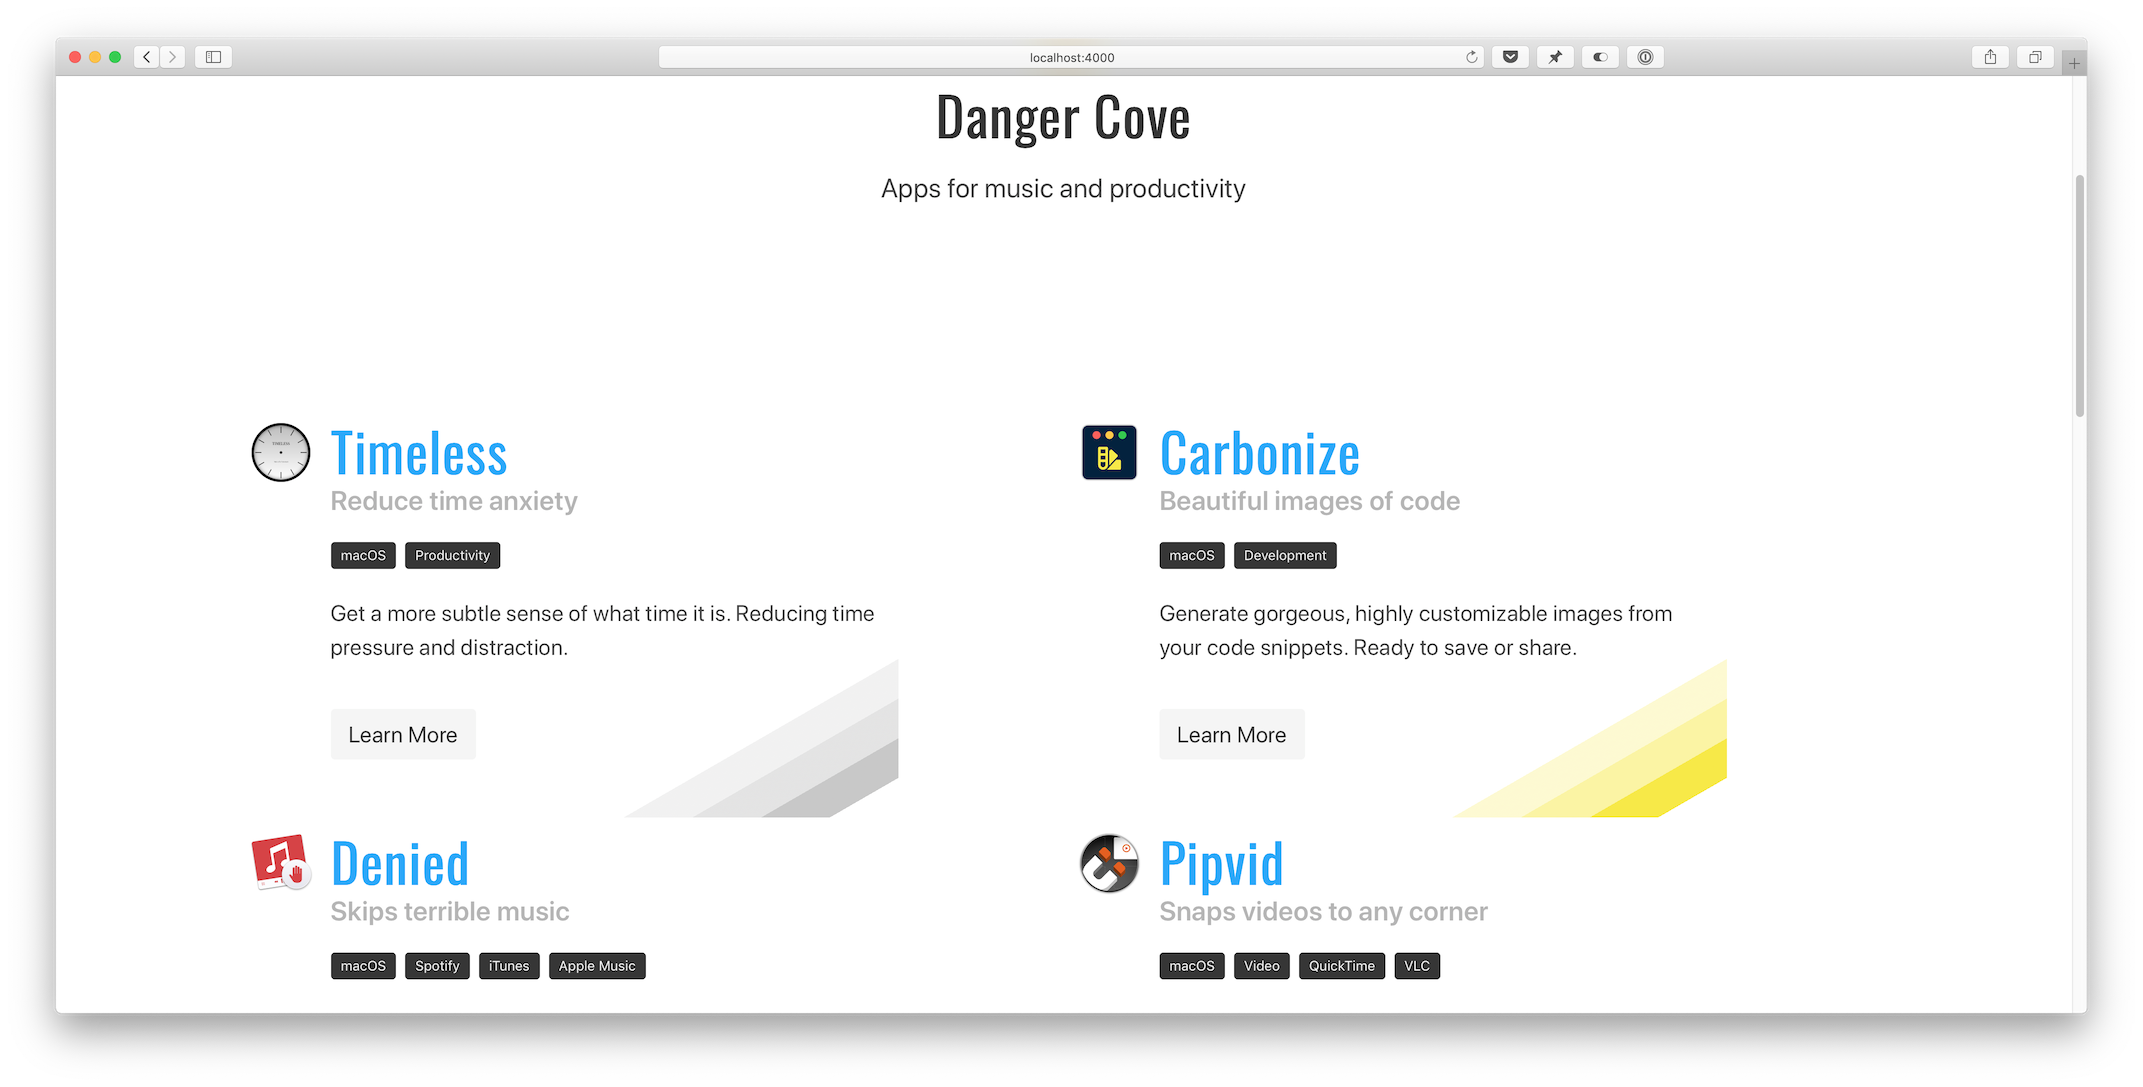 A screenshot of the homepage before the changes. There was a large header with just the Danger Cove logo.